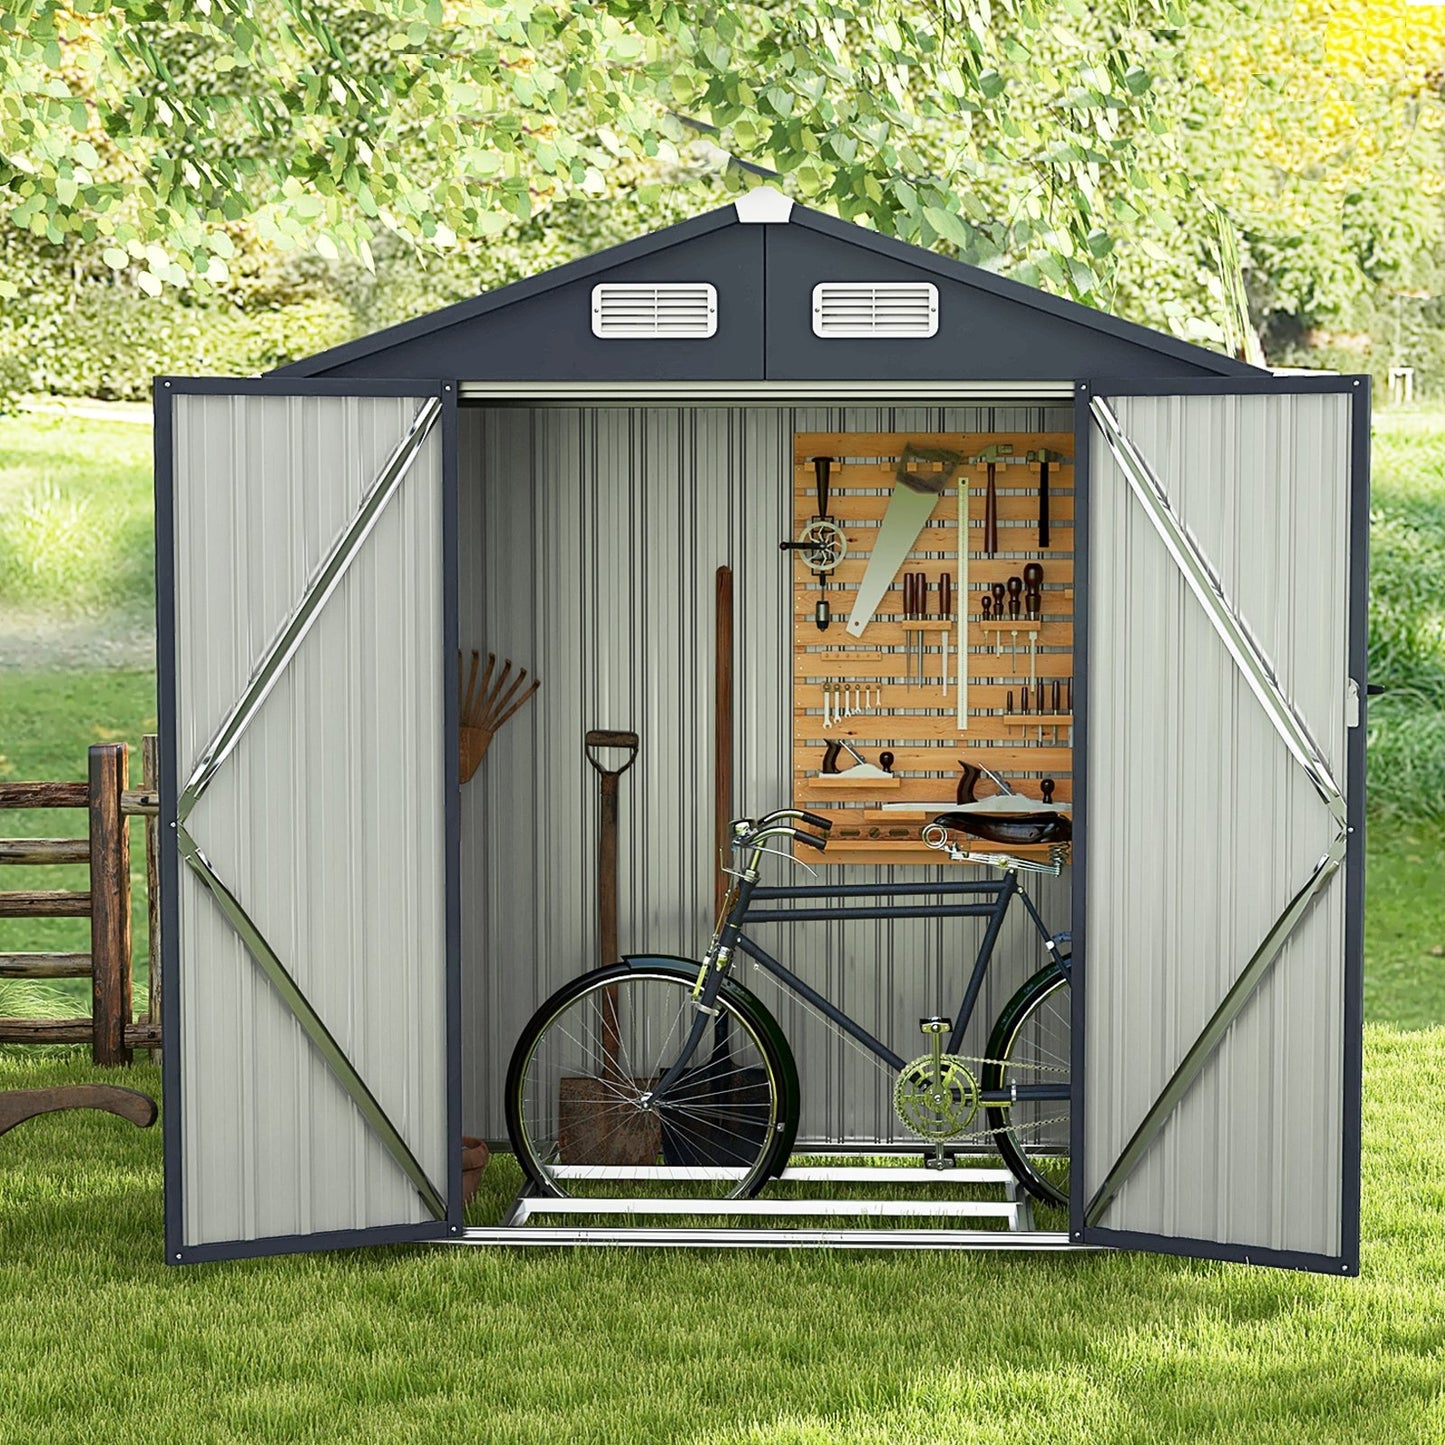 6.3 x 3.5 /10 x 7.7 Feet Galvanized Metal Storage Shed with Vents and Base Floor-6 ft, Dark Gray